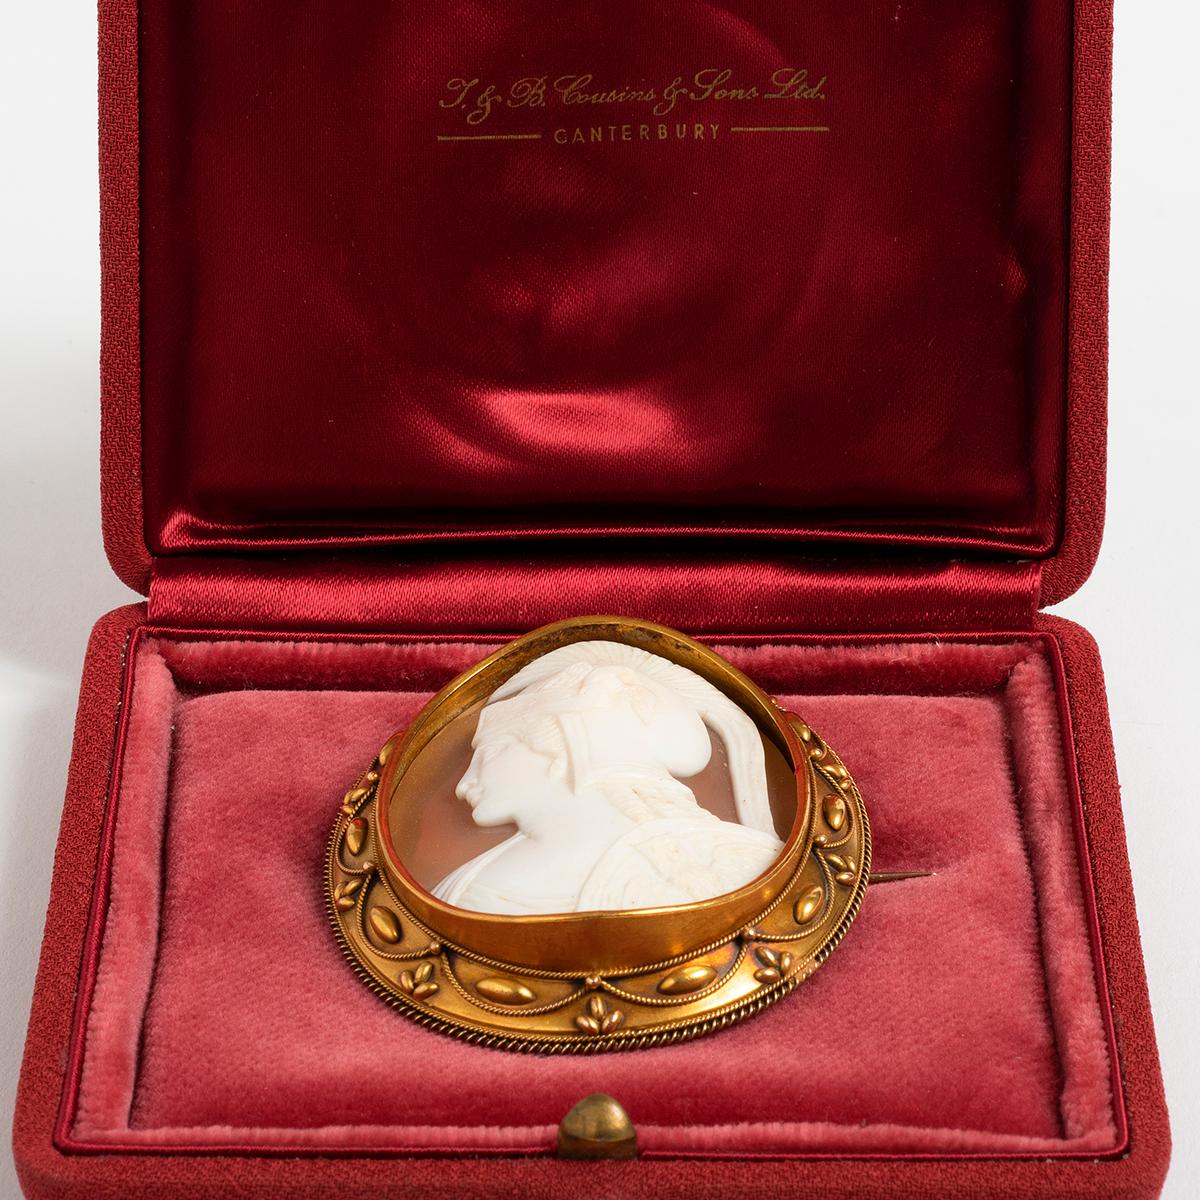 Our extremely rare and attractive antique cameo broach is made of shell and porcelain and set in 18k gold with a safety clasp to ensure it is securely fastened. Unusual, featuring a Roman head, this is a breathtaking cameo, in wonderful condition